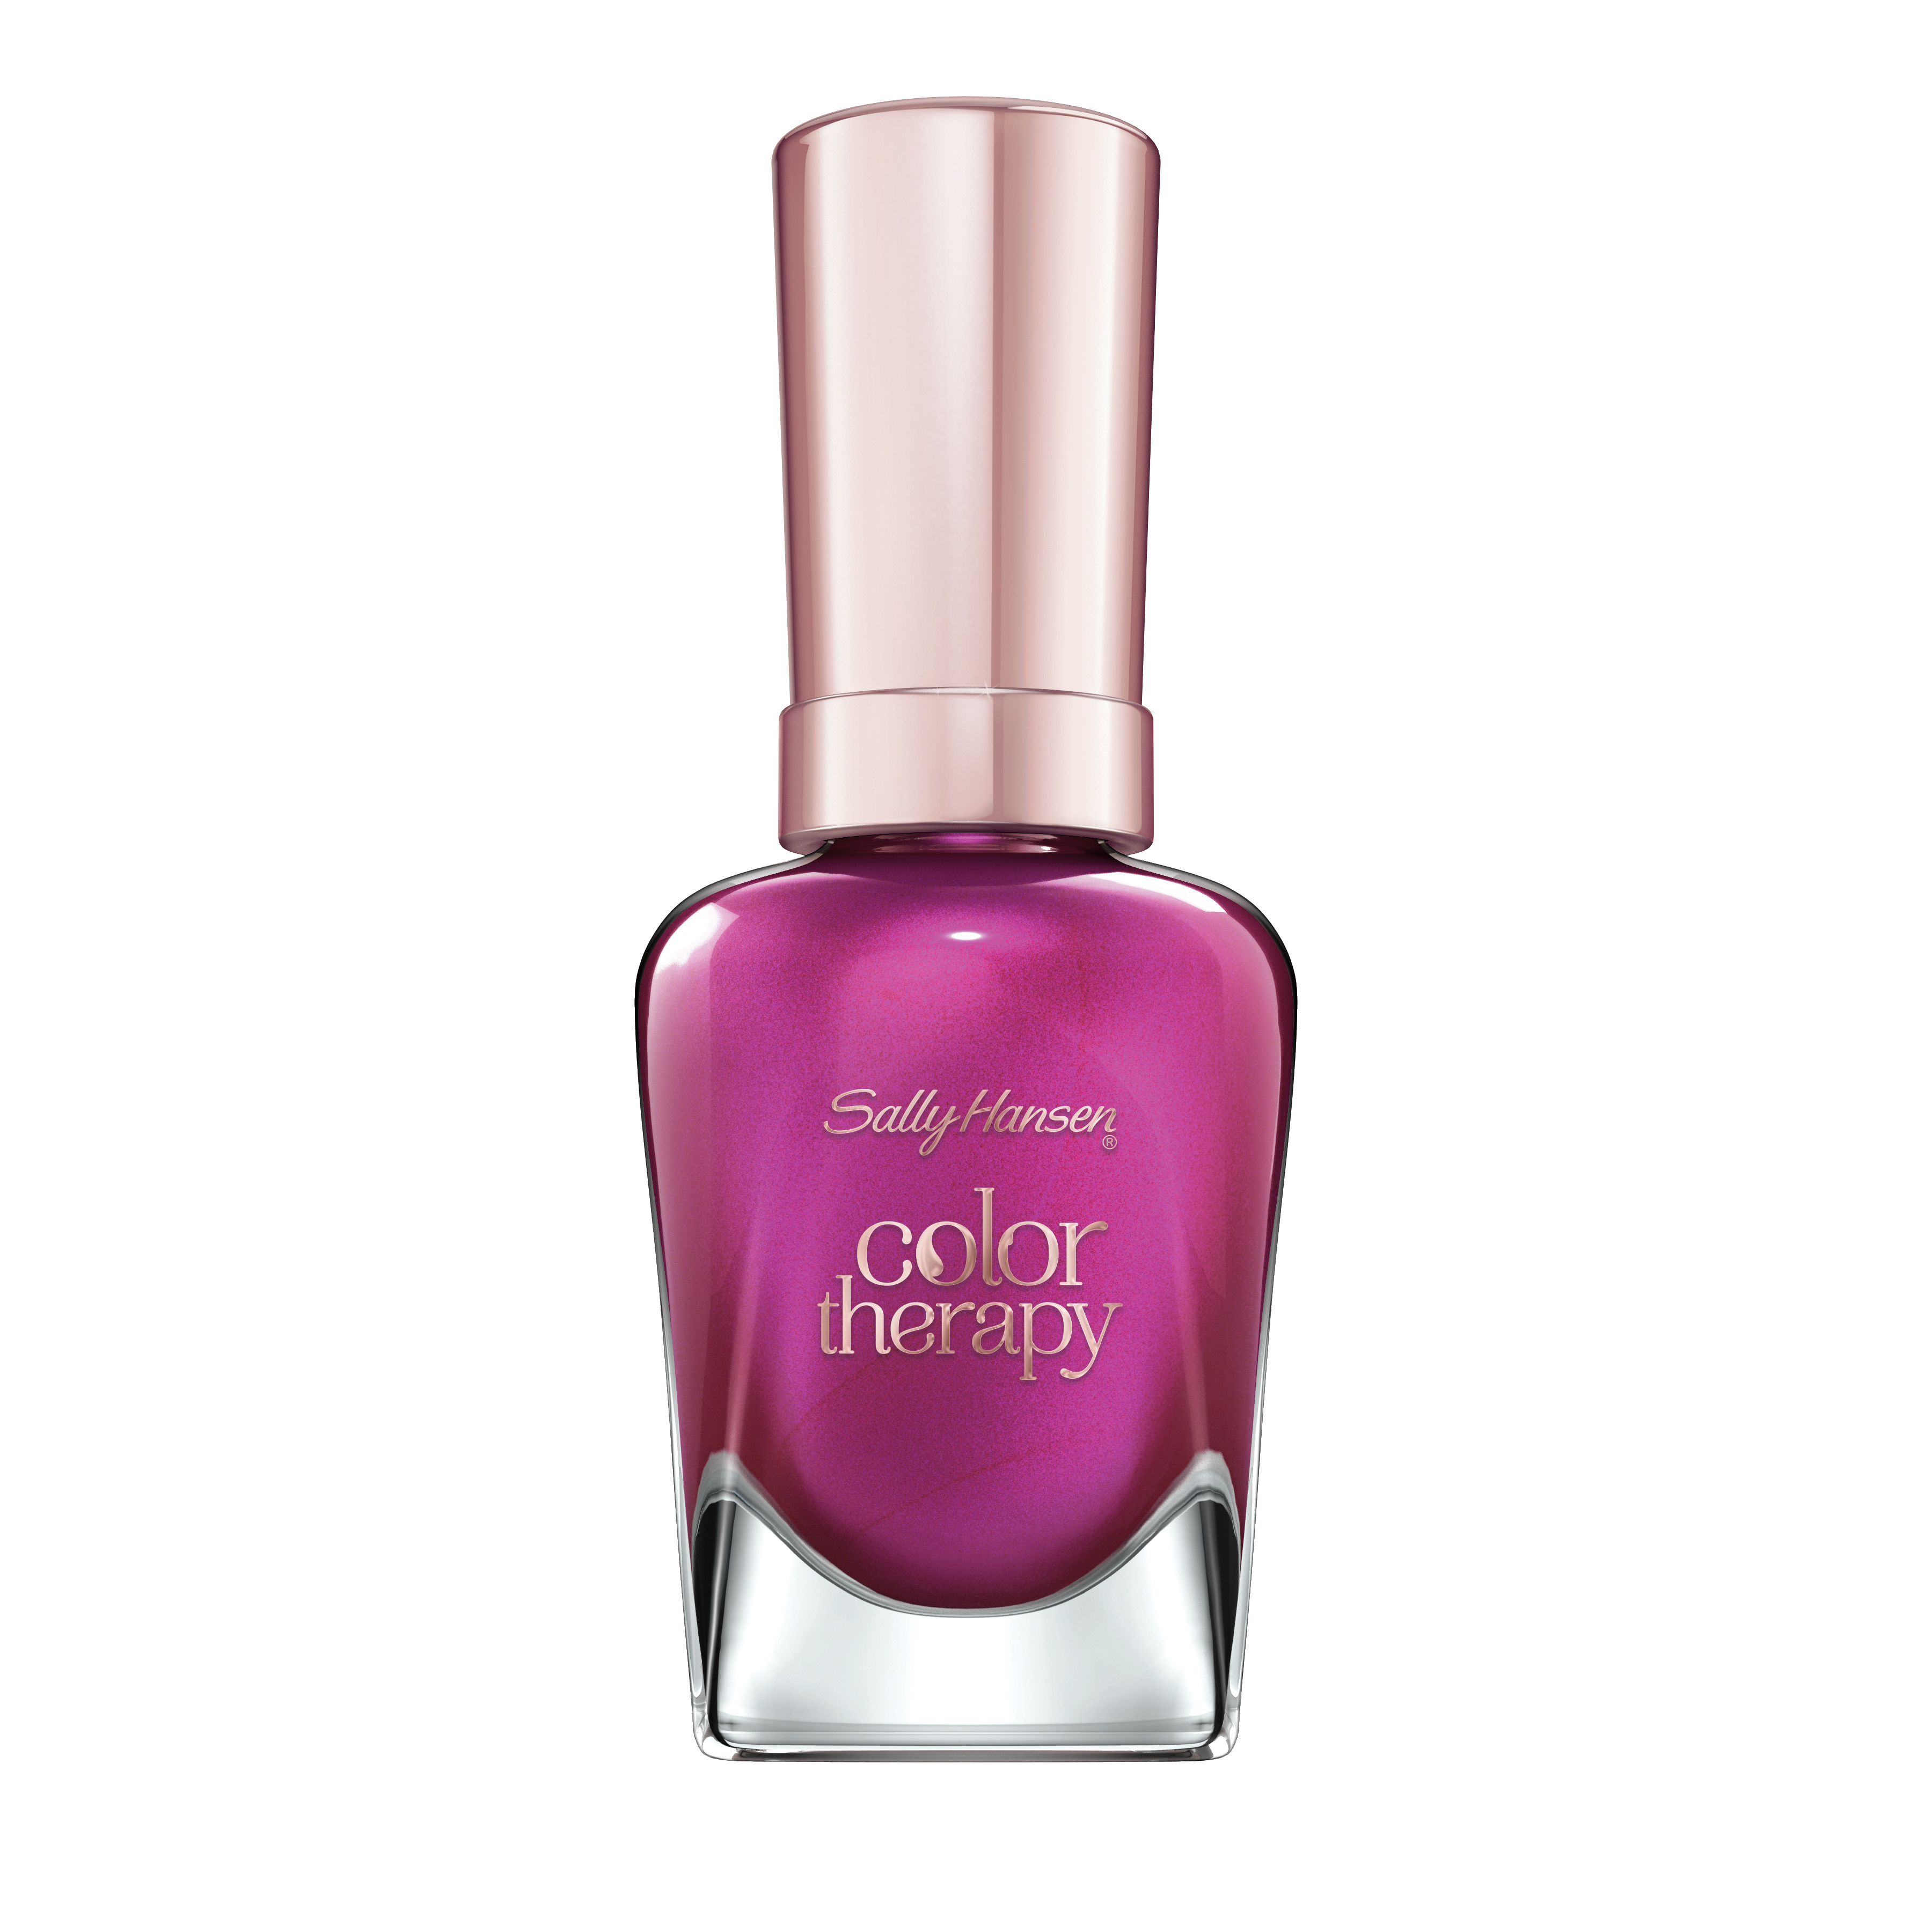 Sally Hansen Color Therapy Nail Polish, Robes and Rose - image 1 of 3